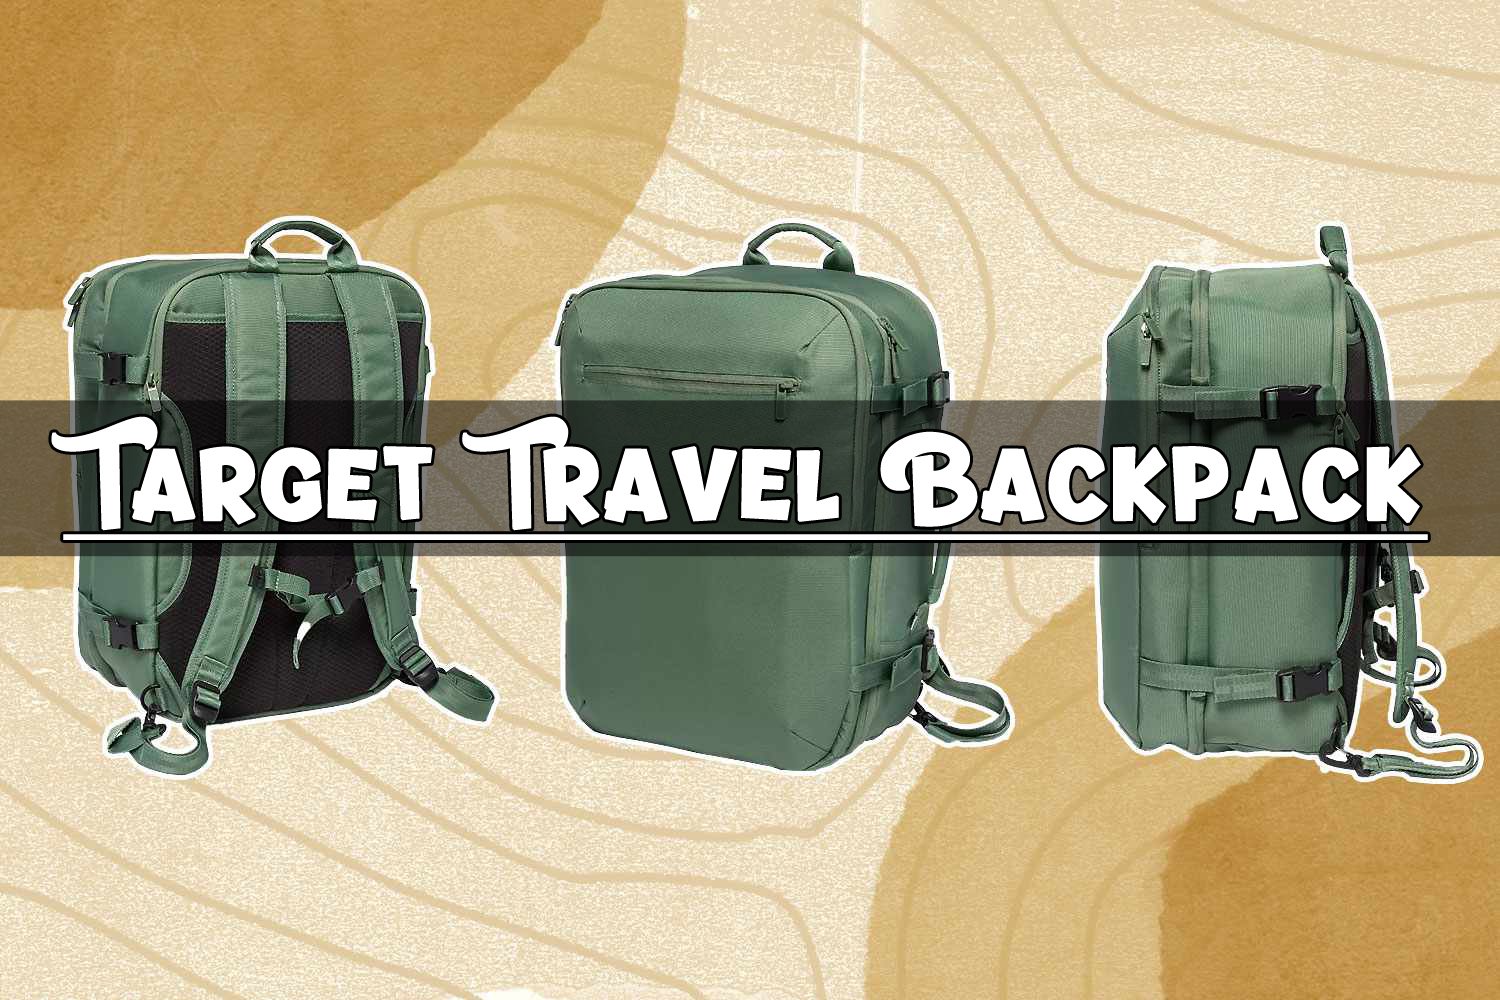 Target Travel Backpack: Your Perfect Companion